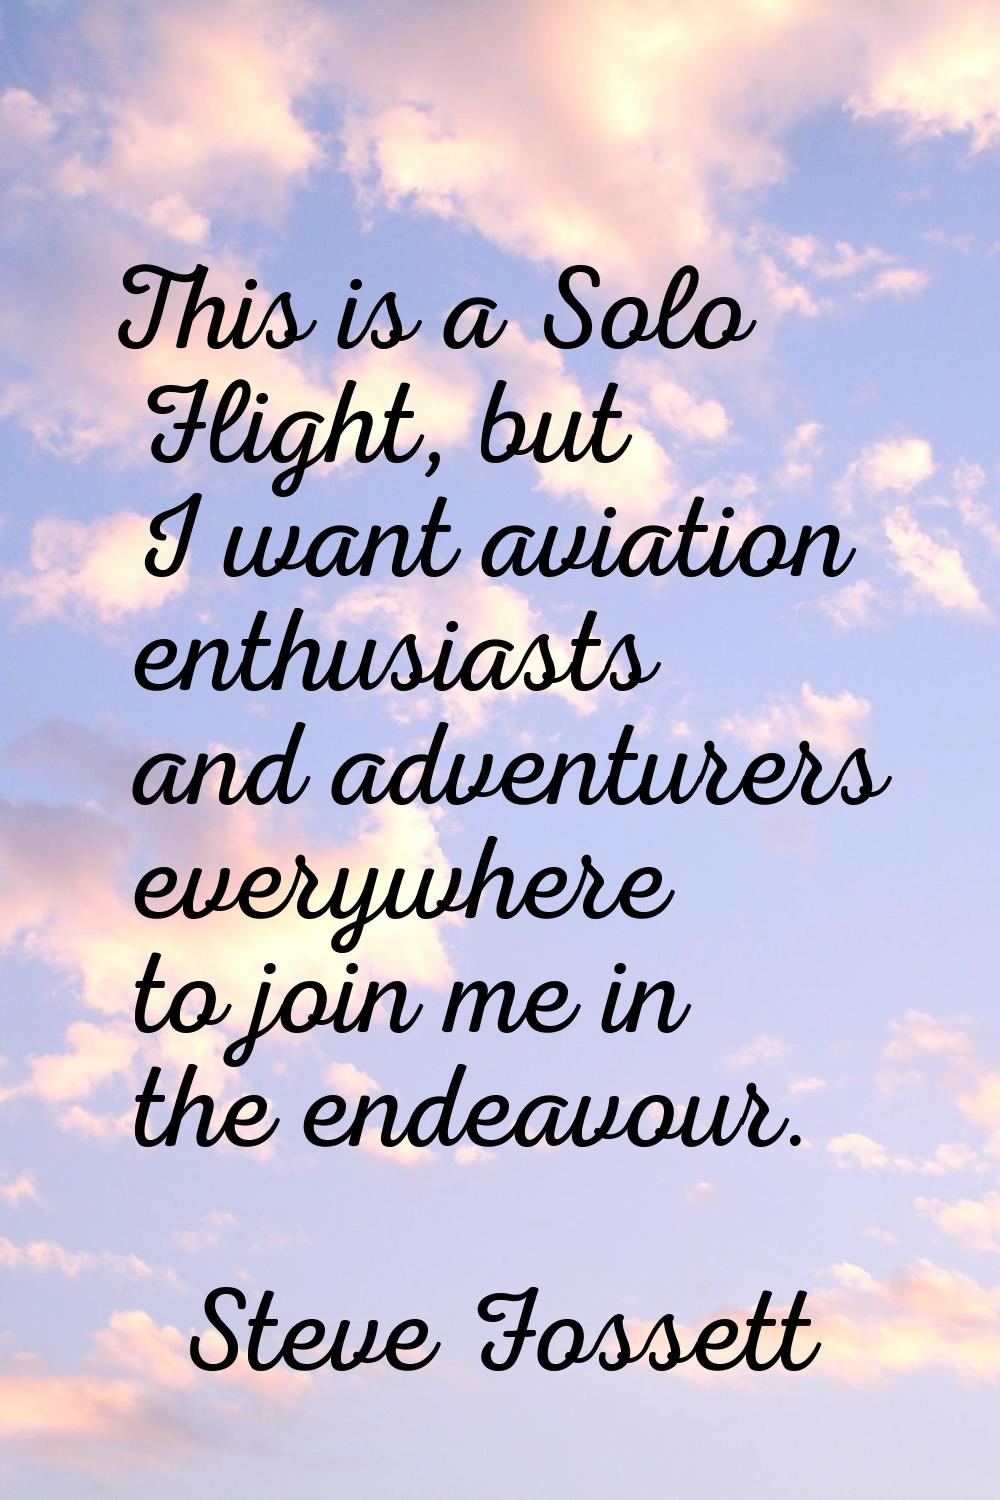 This is a Solo Flight, but I want aviation enthusiasts and adventurers everywhere to join me in the